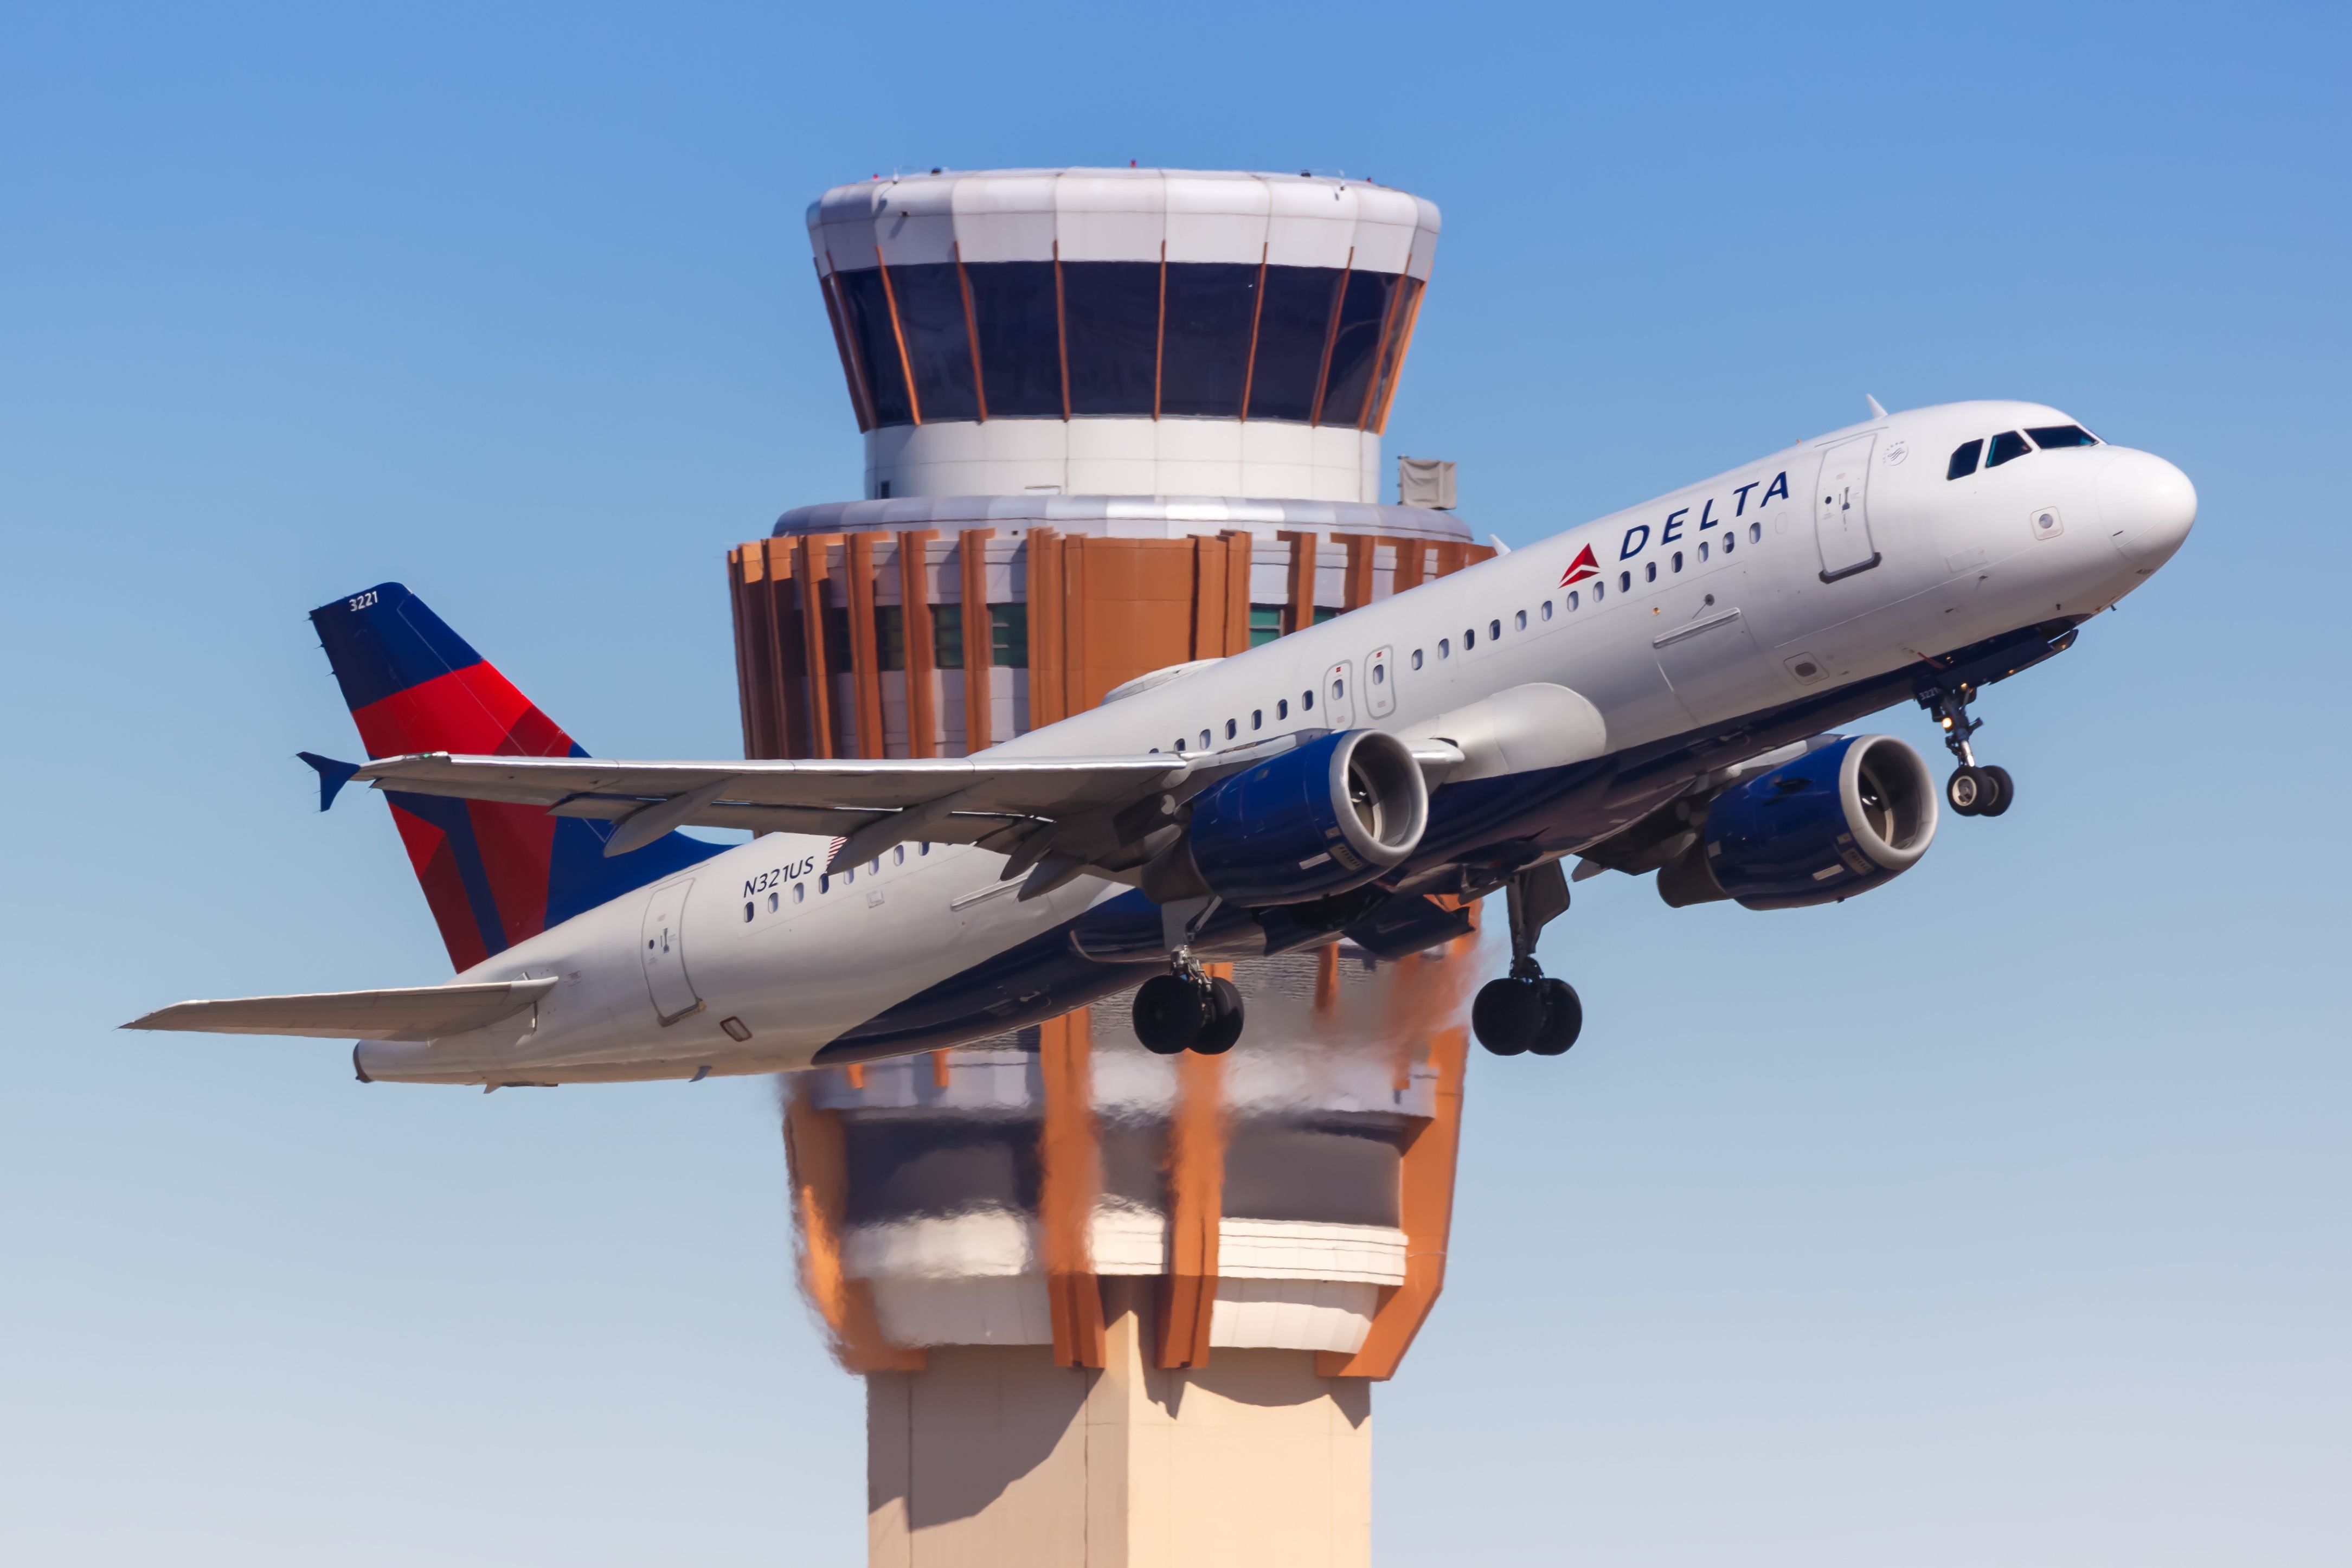  Delta Air Lines Airbus A320 airplane at Phoenix airport (PHX)